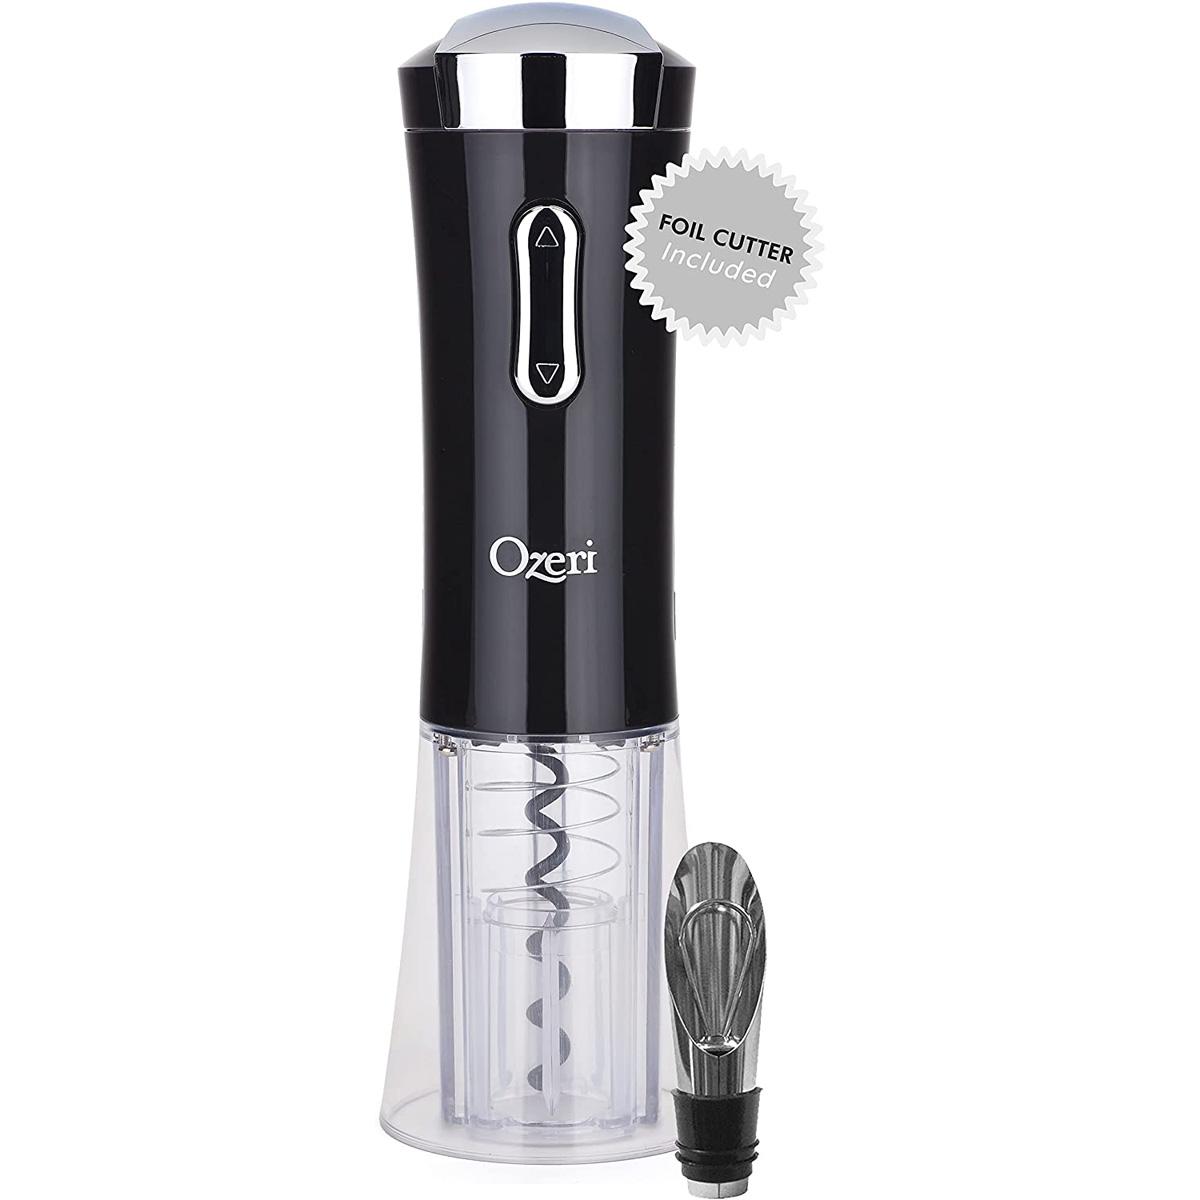 Ozeri Nouveaux II Electric Wine Opener with Foil Cutter for $9.37